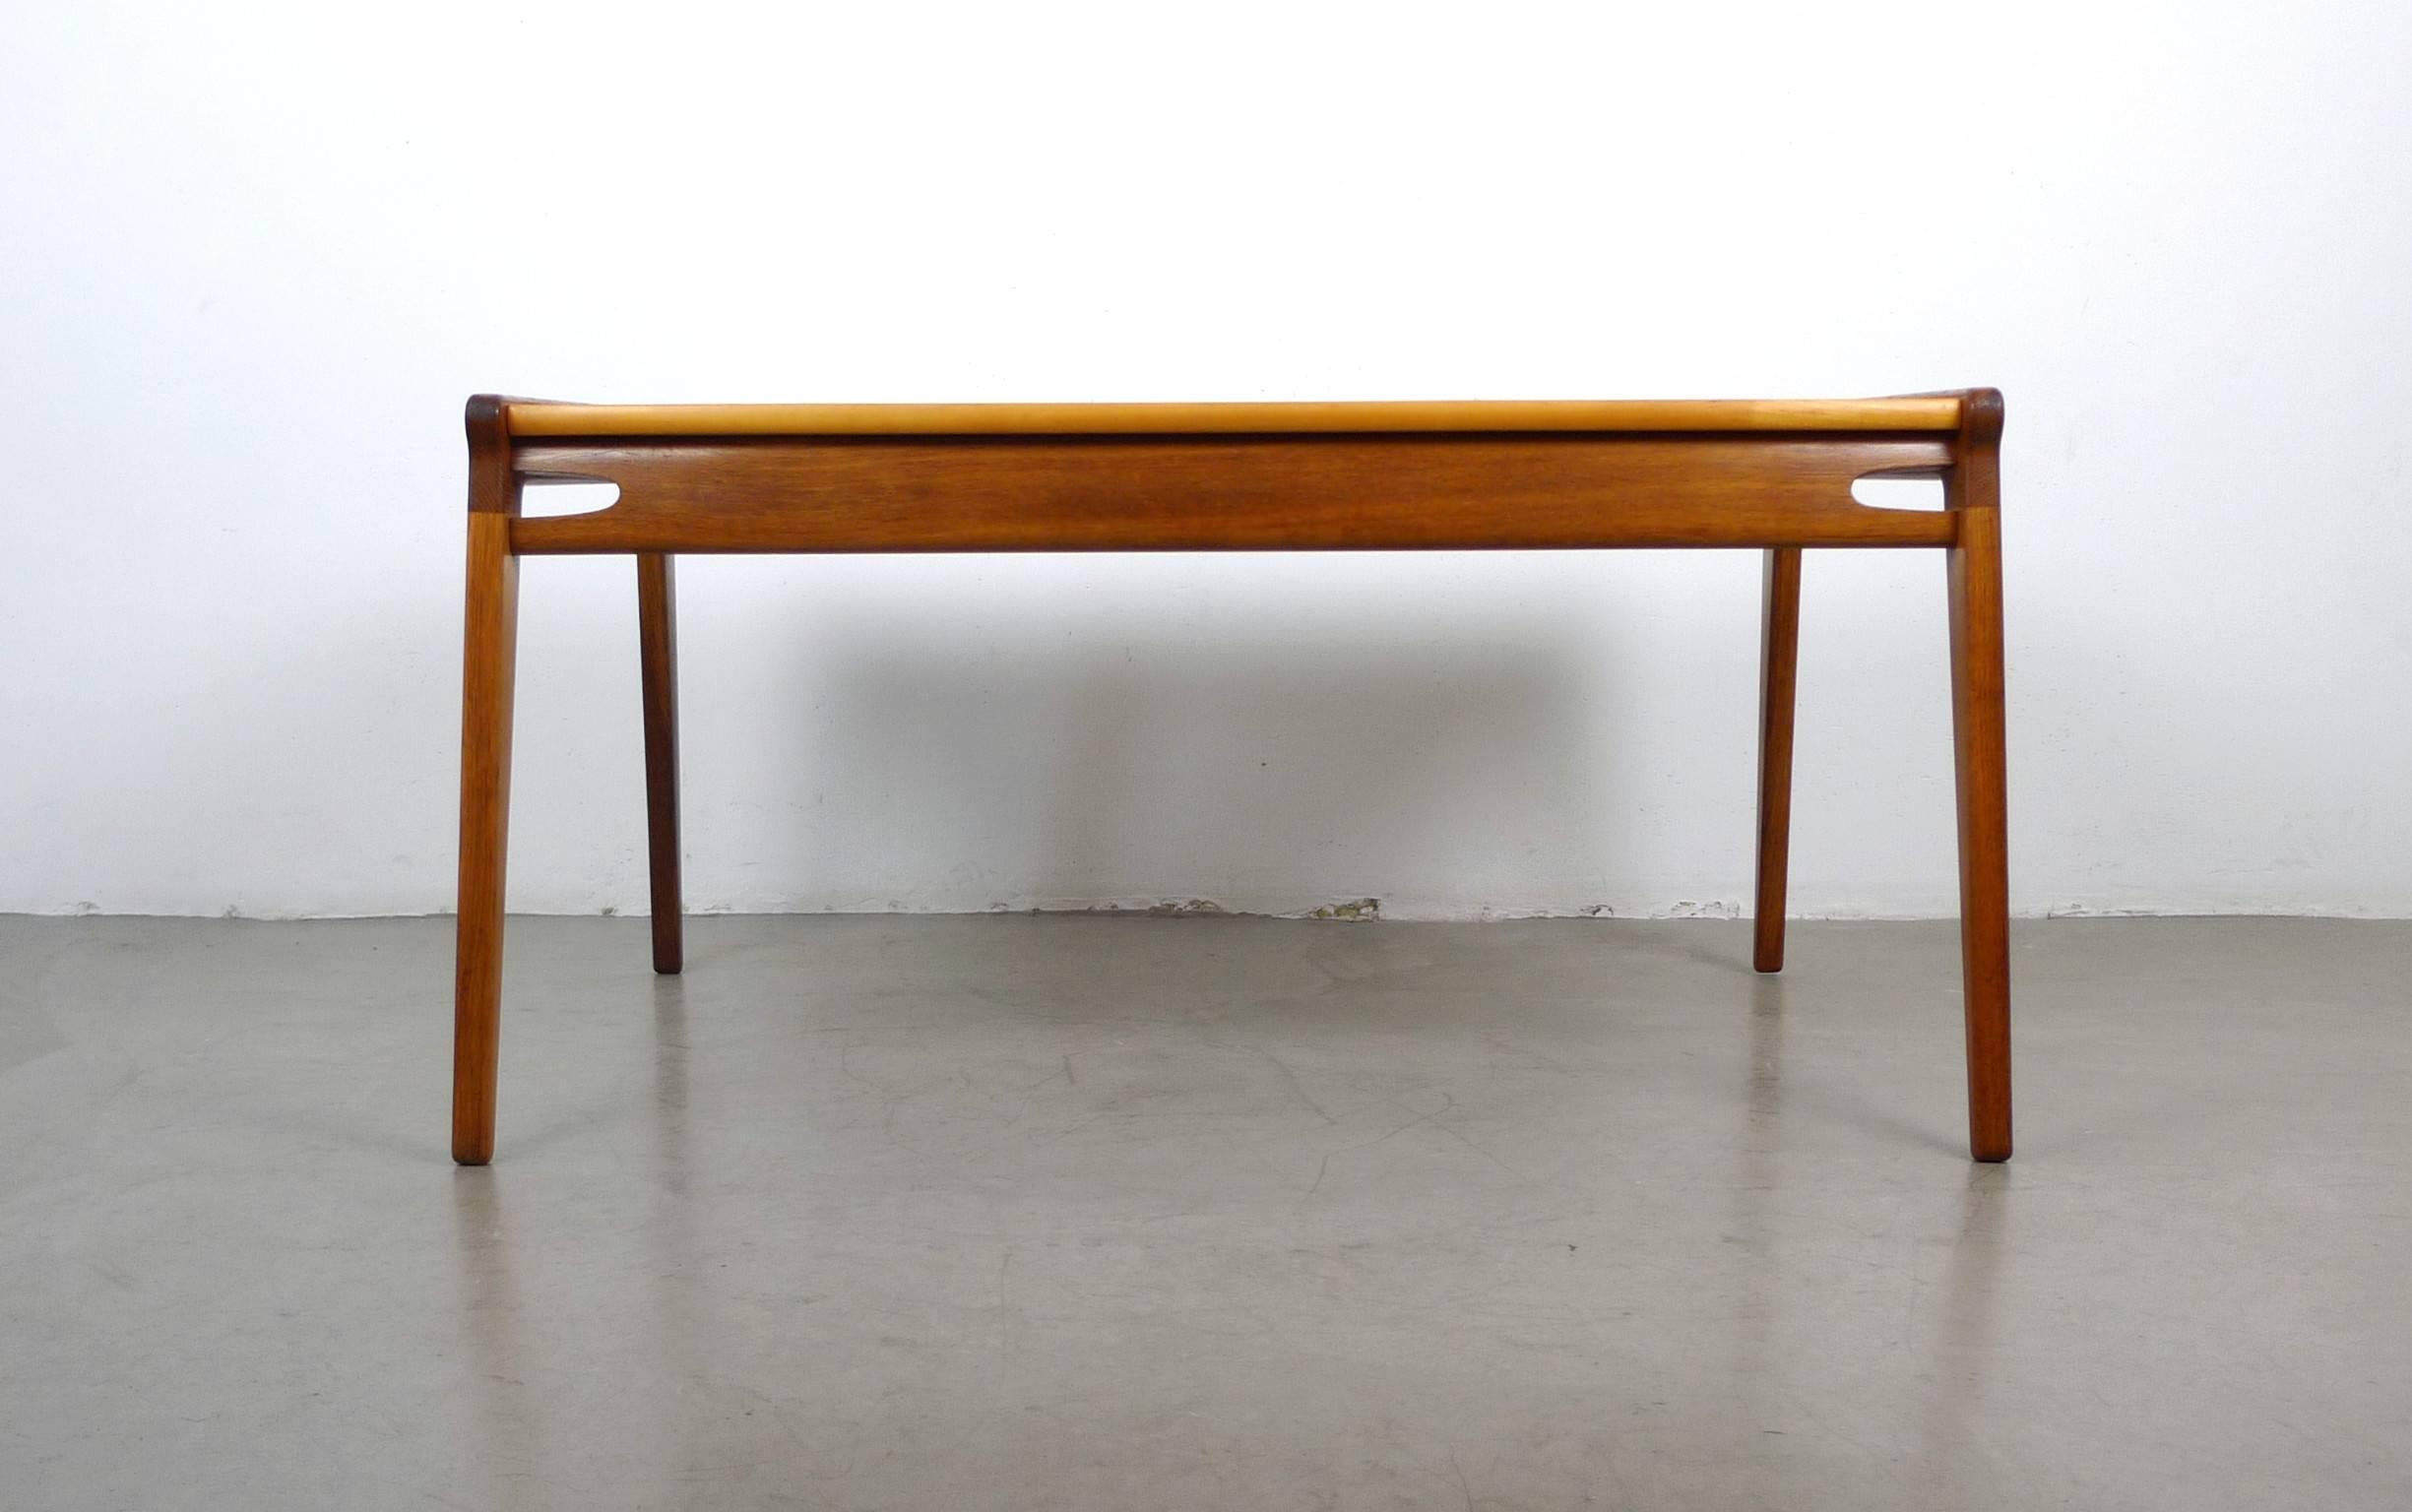 Mid-Century coffee table from Germany. The frame is made of solid oak and the tabletop is made of ash leaf maple. The edges of the frame are connected with decorative wood tenons.
This coffee table is in very good original condition with only small